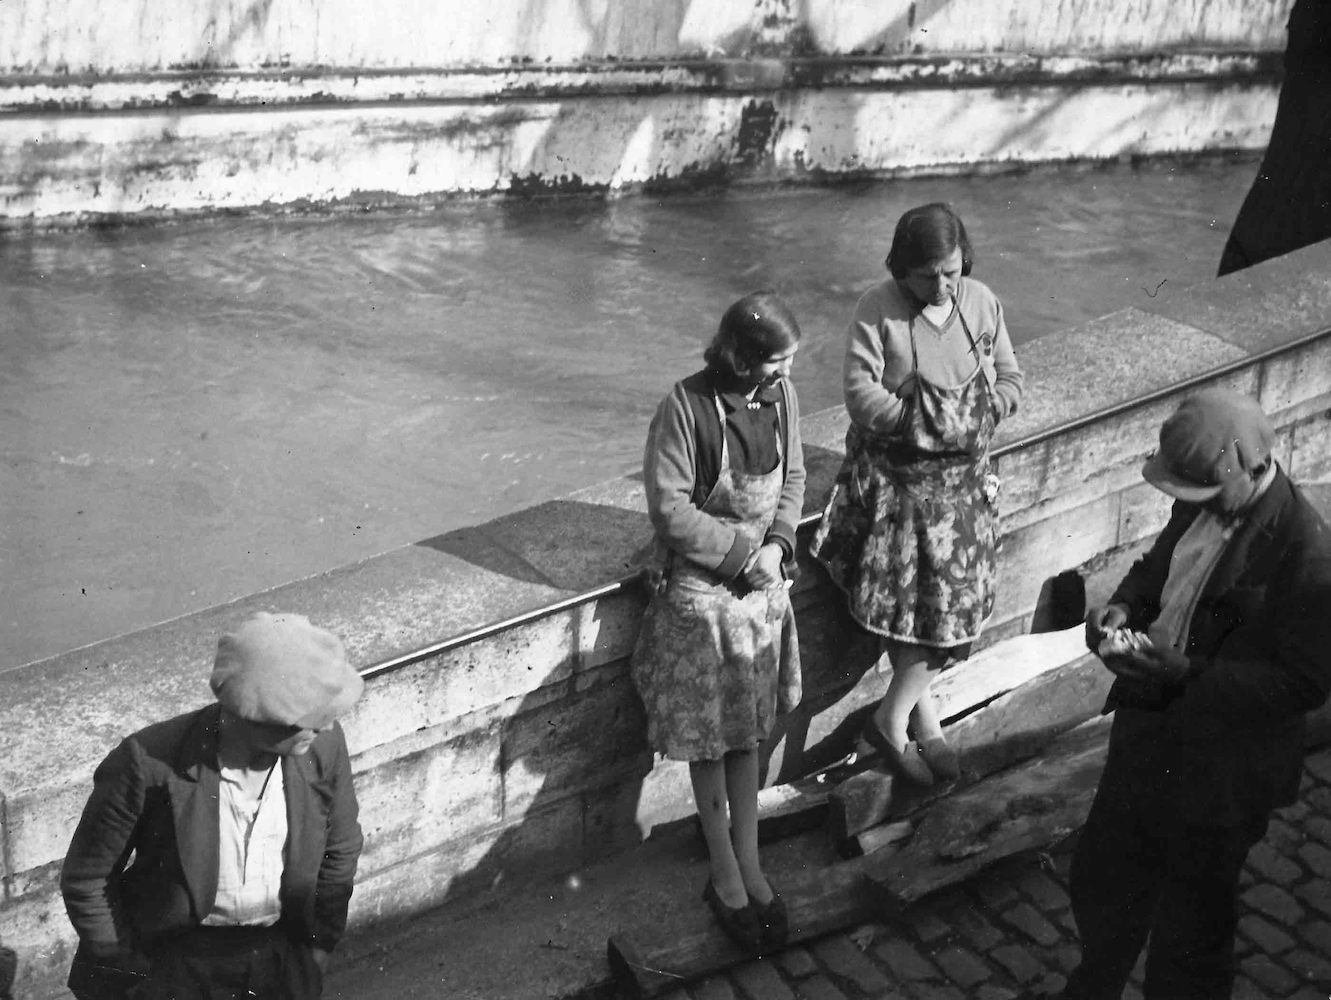 Street Scene in Paris. Group of two Men and two Women on the Embankment of the Seine